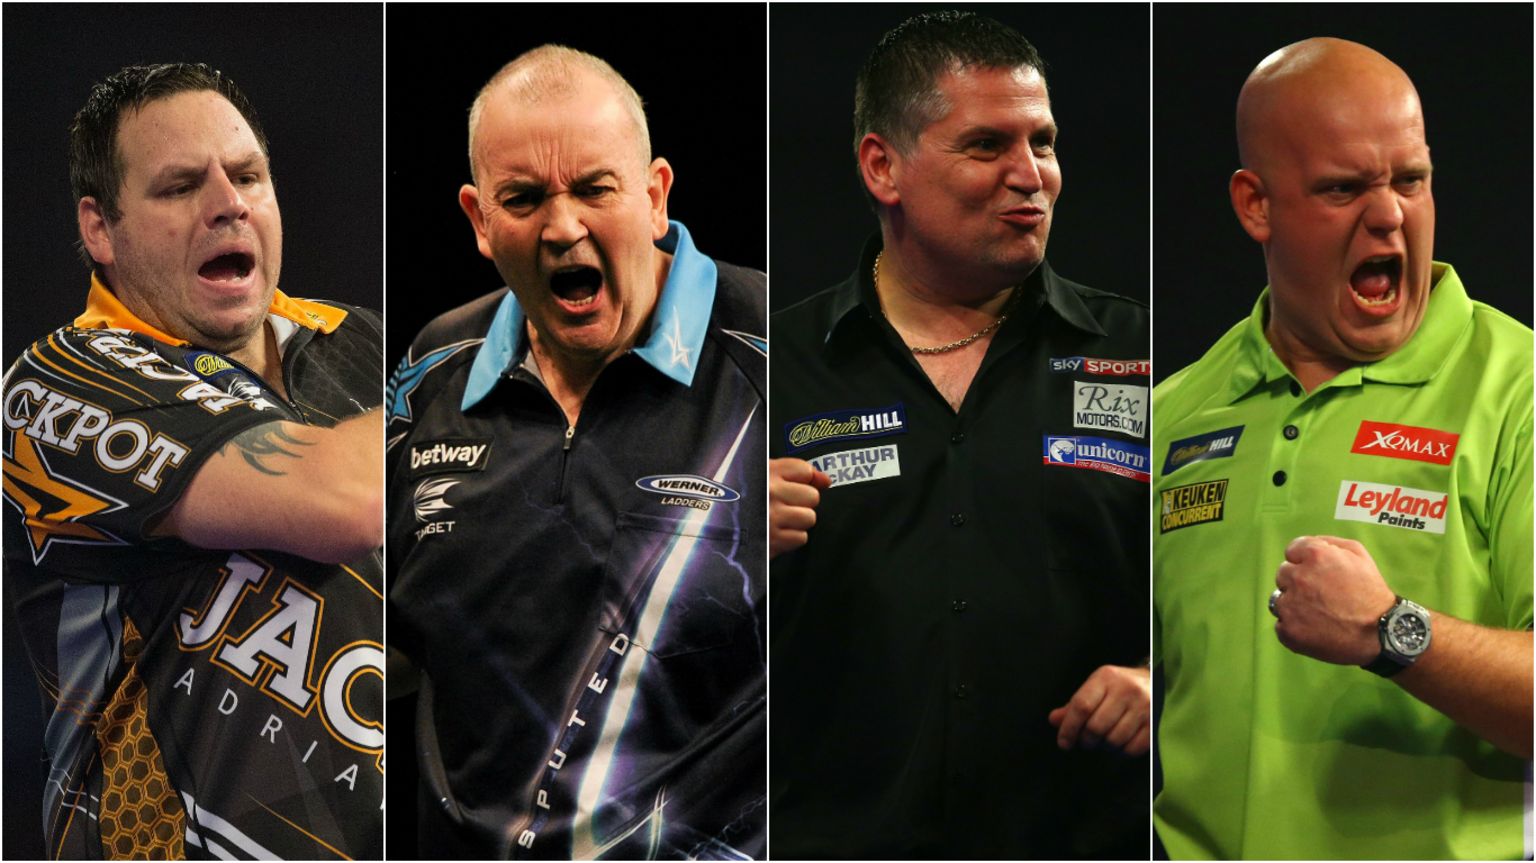 PDC Champions League of Darts